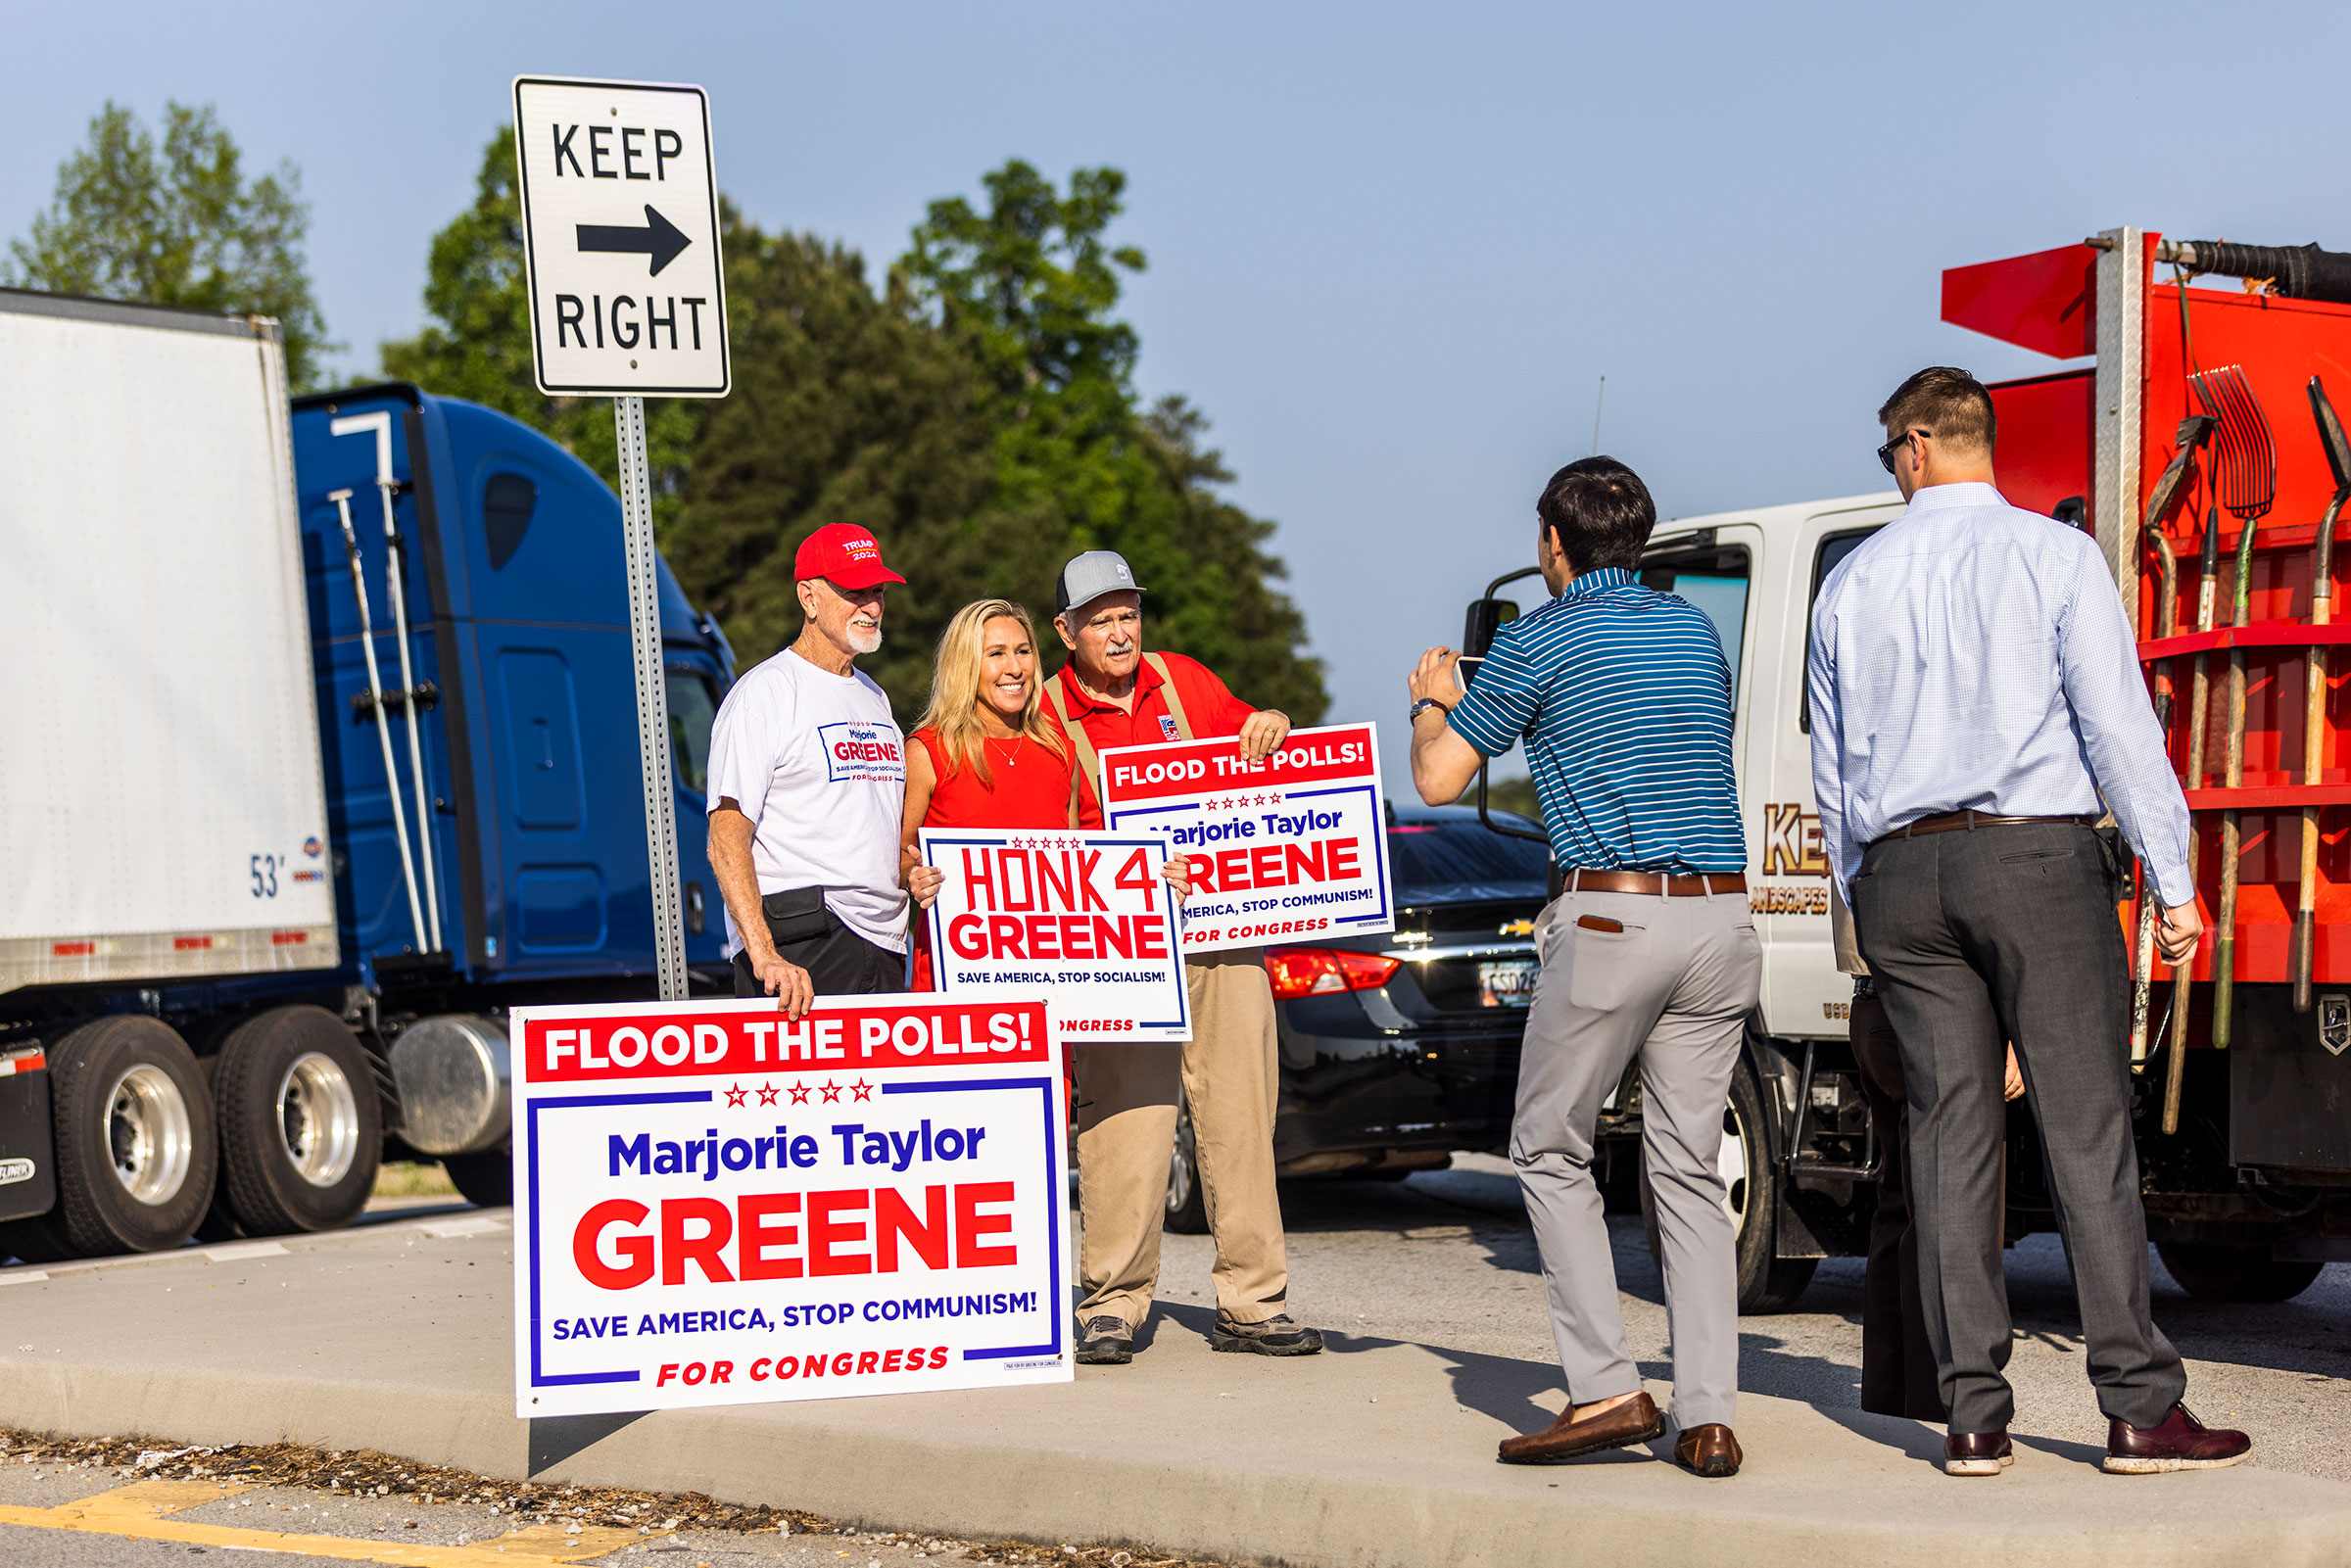 Greene waves signs with supporters on U.S. Highway 278 in Dallas, Ga. (Andrew Hetherington for TIME)